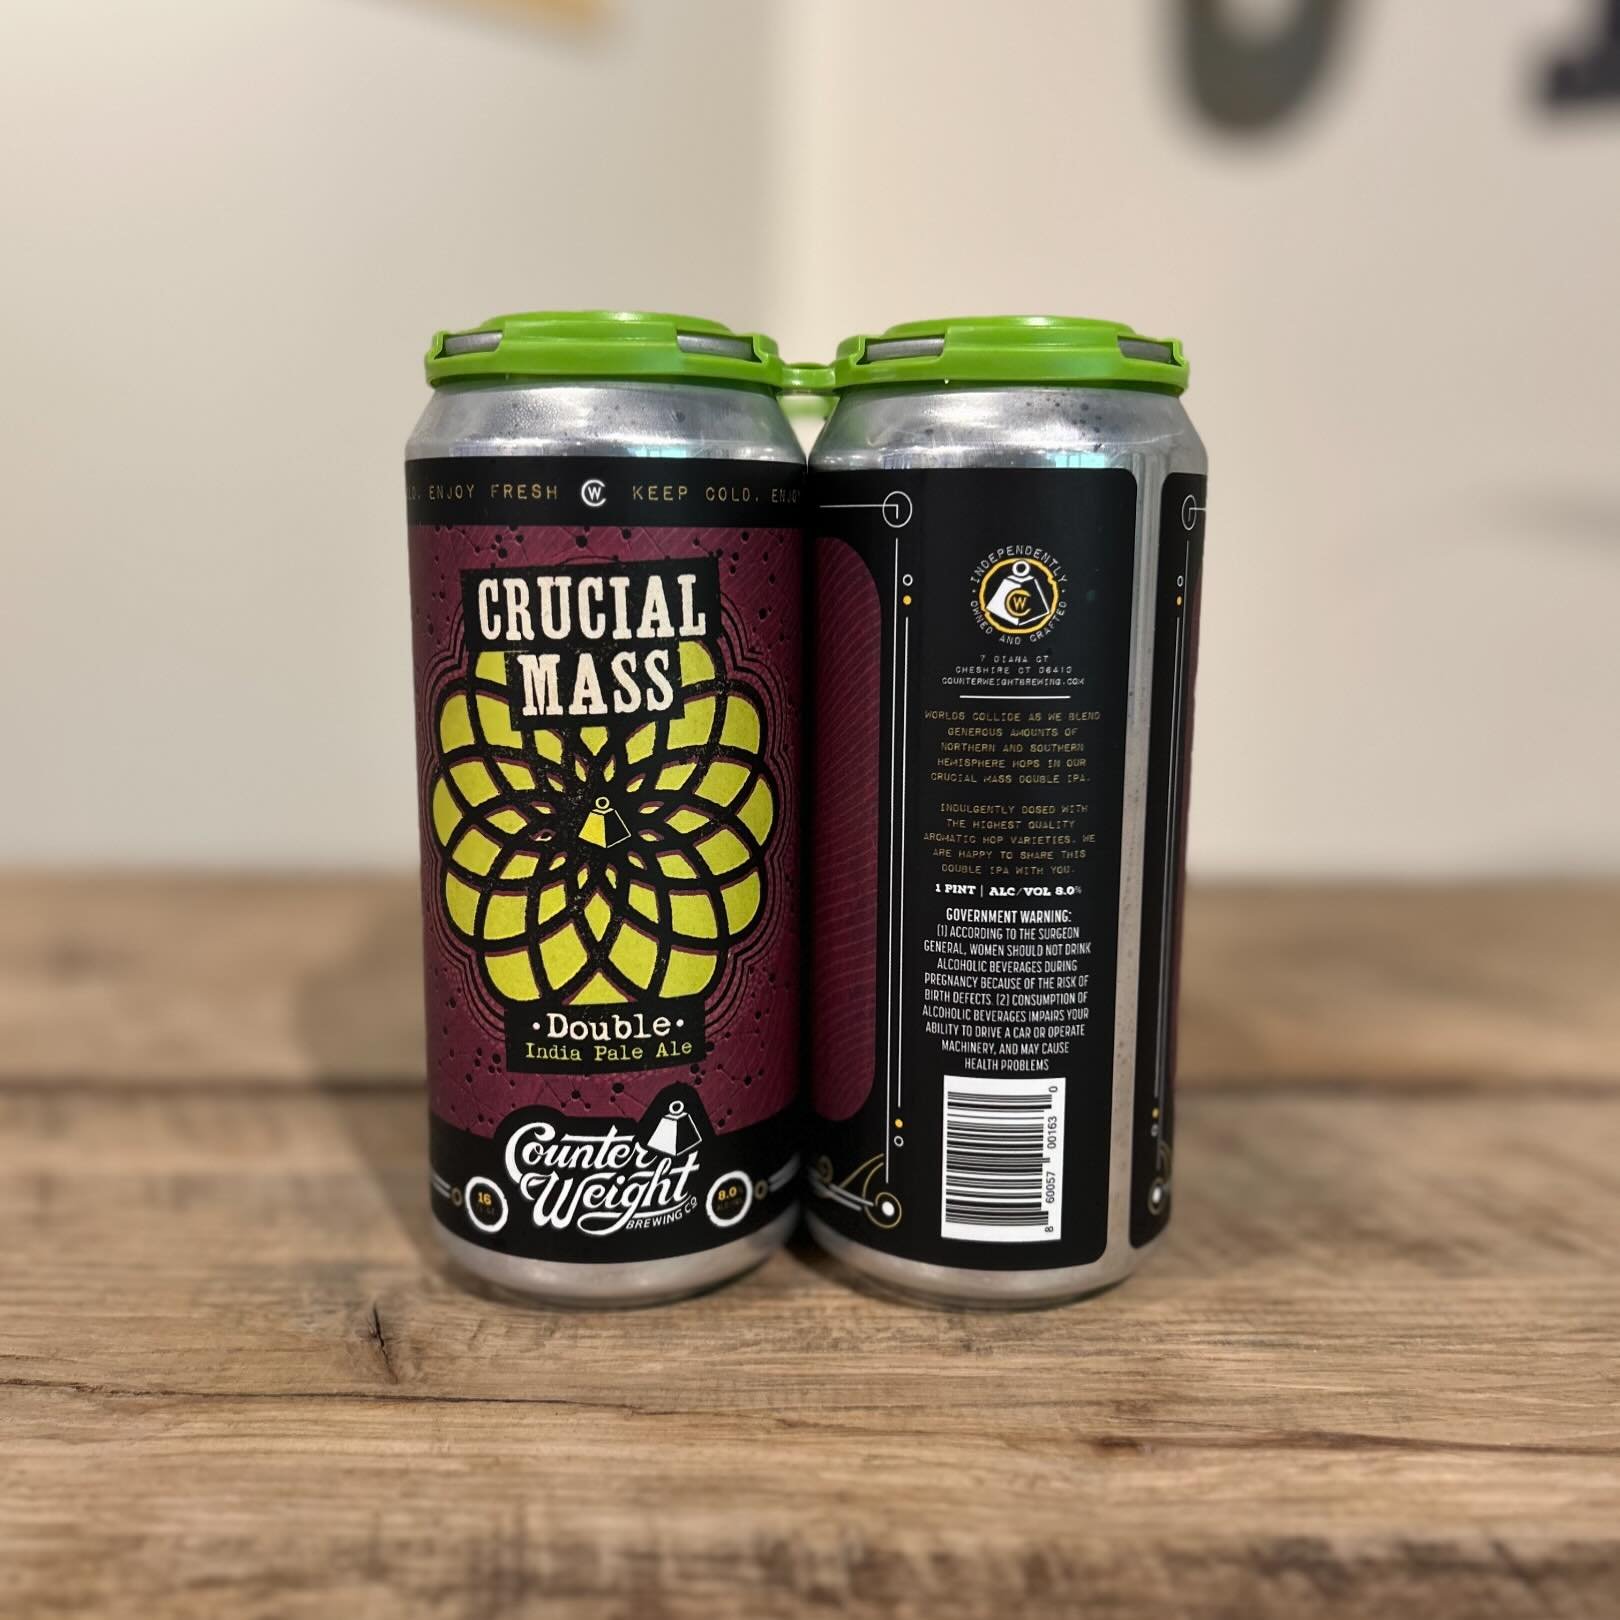 Introducing @counterweightbrewingco to the shop this week #NowAvailable #SudburyCraftBeer #SudburyMA
&mdash;
Crucial Mass // DIPA // 8% ABV

Crucial Mass is an America DIPA brewed with a blend of American and Southern hemisphere hop varieties that co